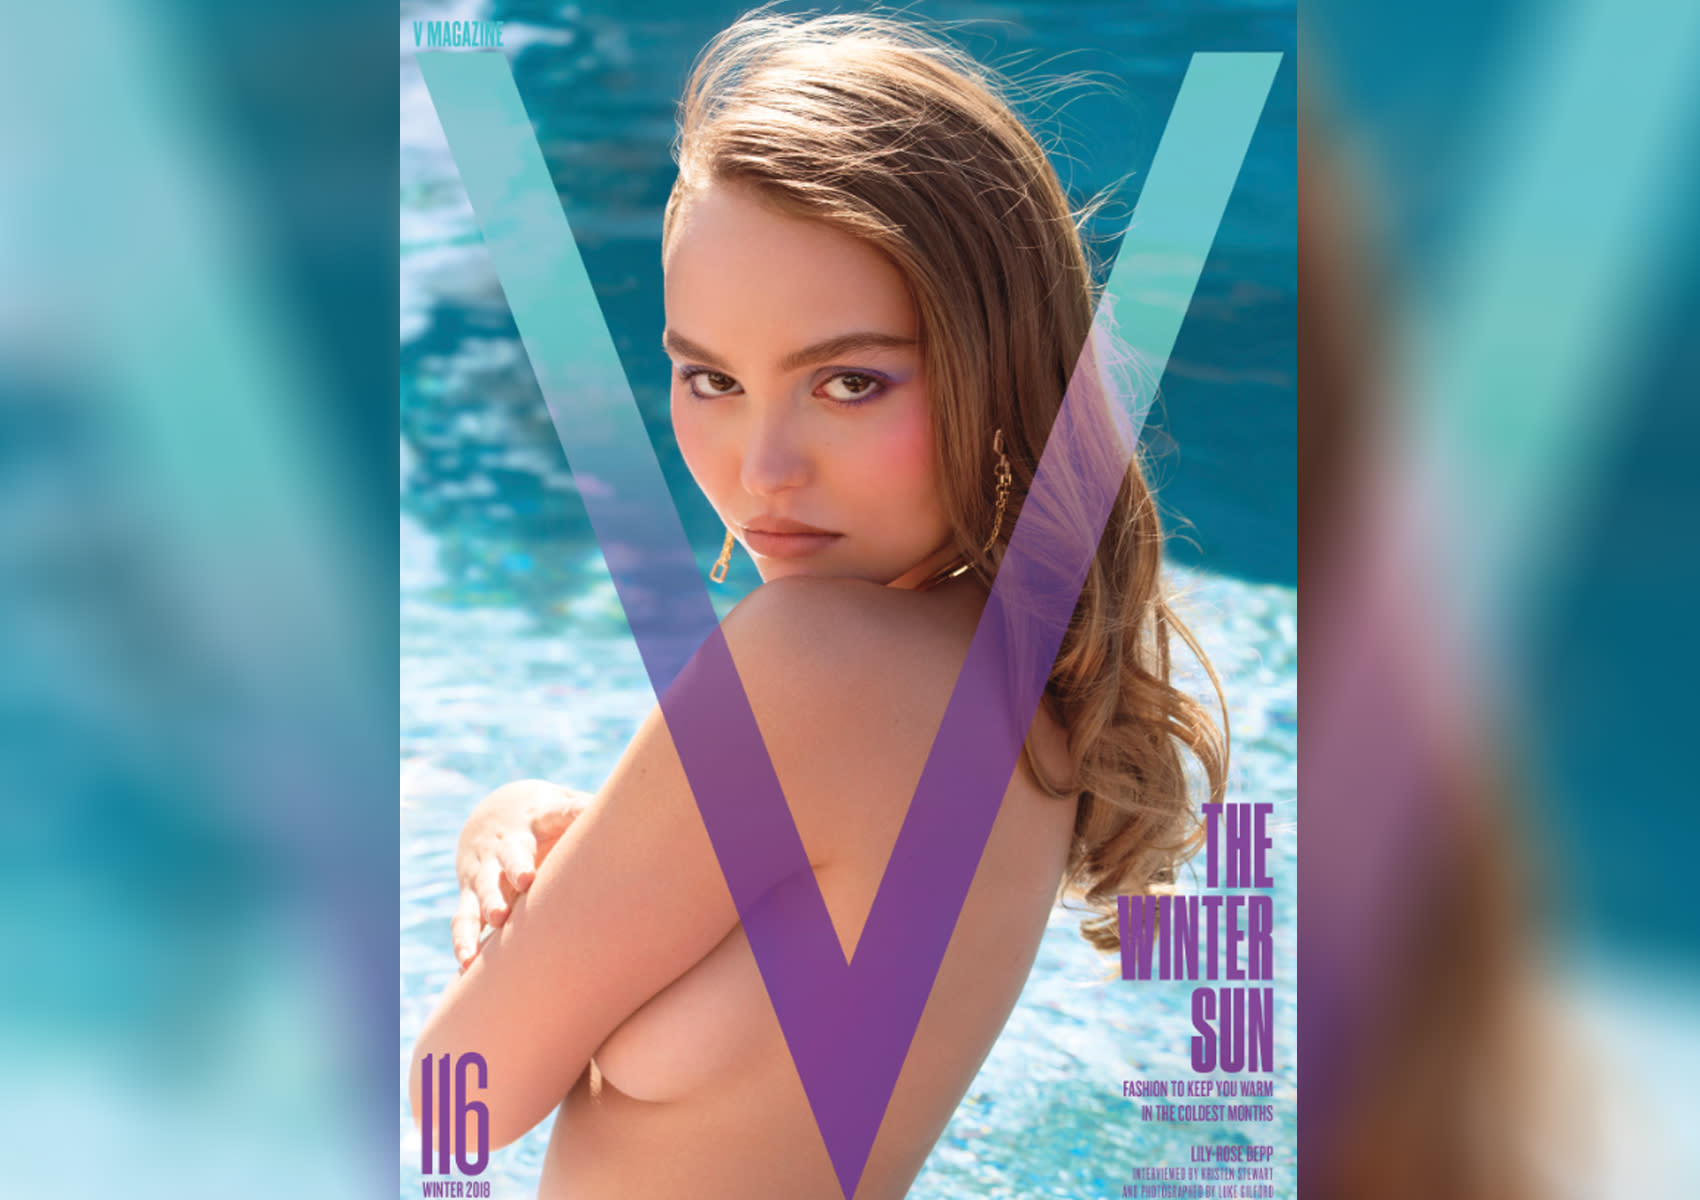 Lily Rose Depp 19 Goes Topless For V Magazine In Shoot With Pamela.